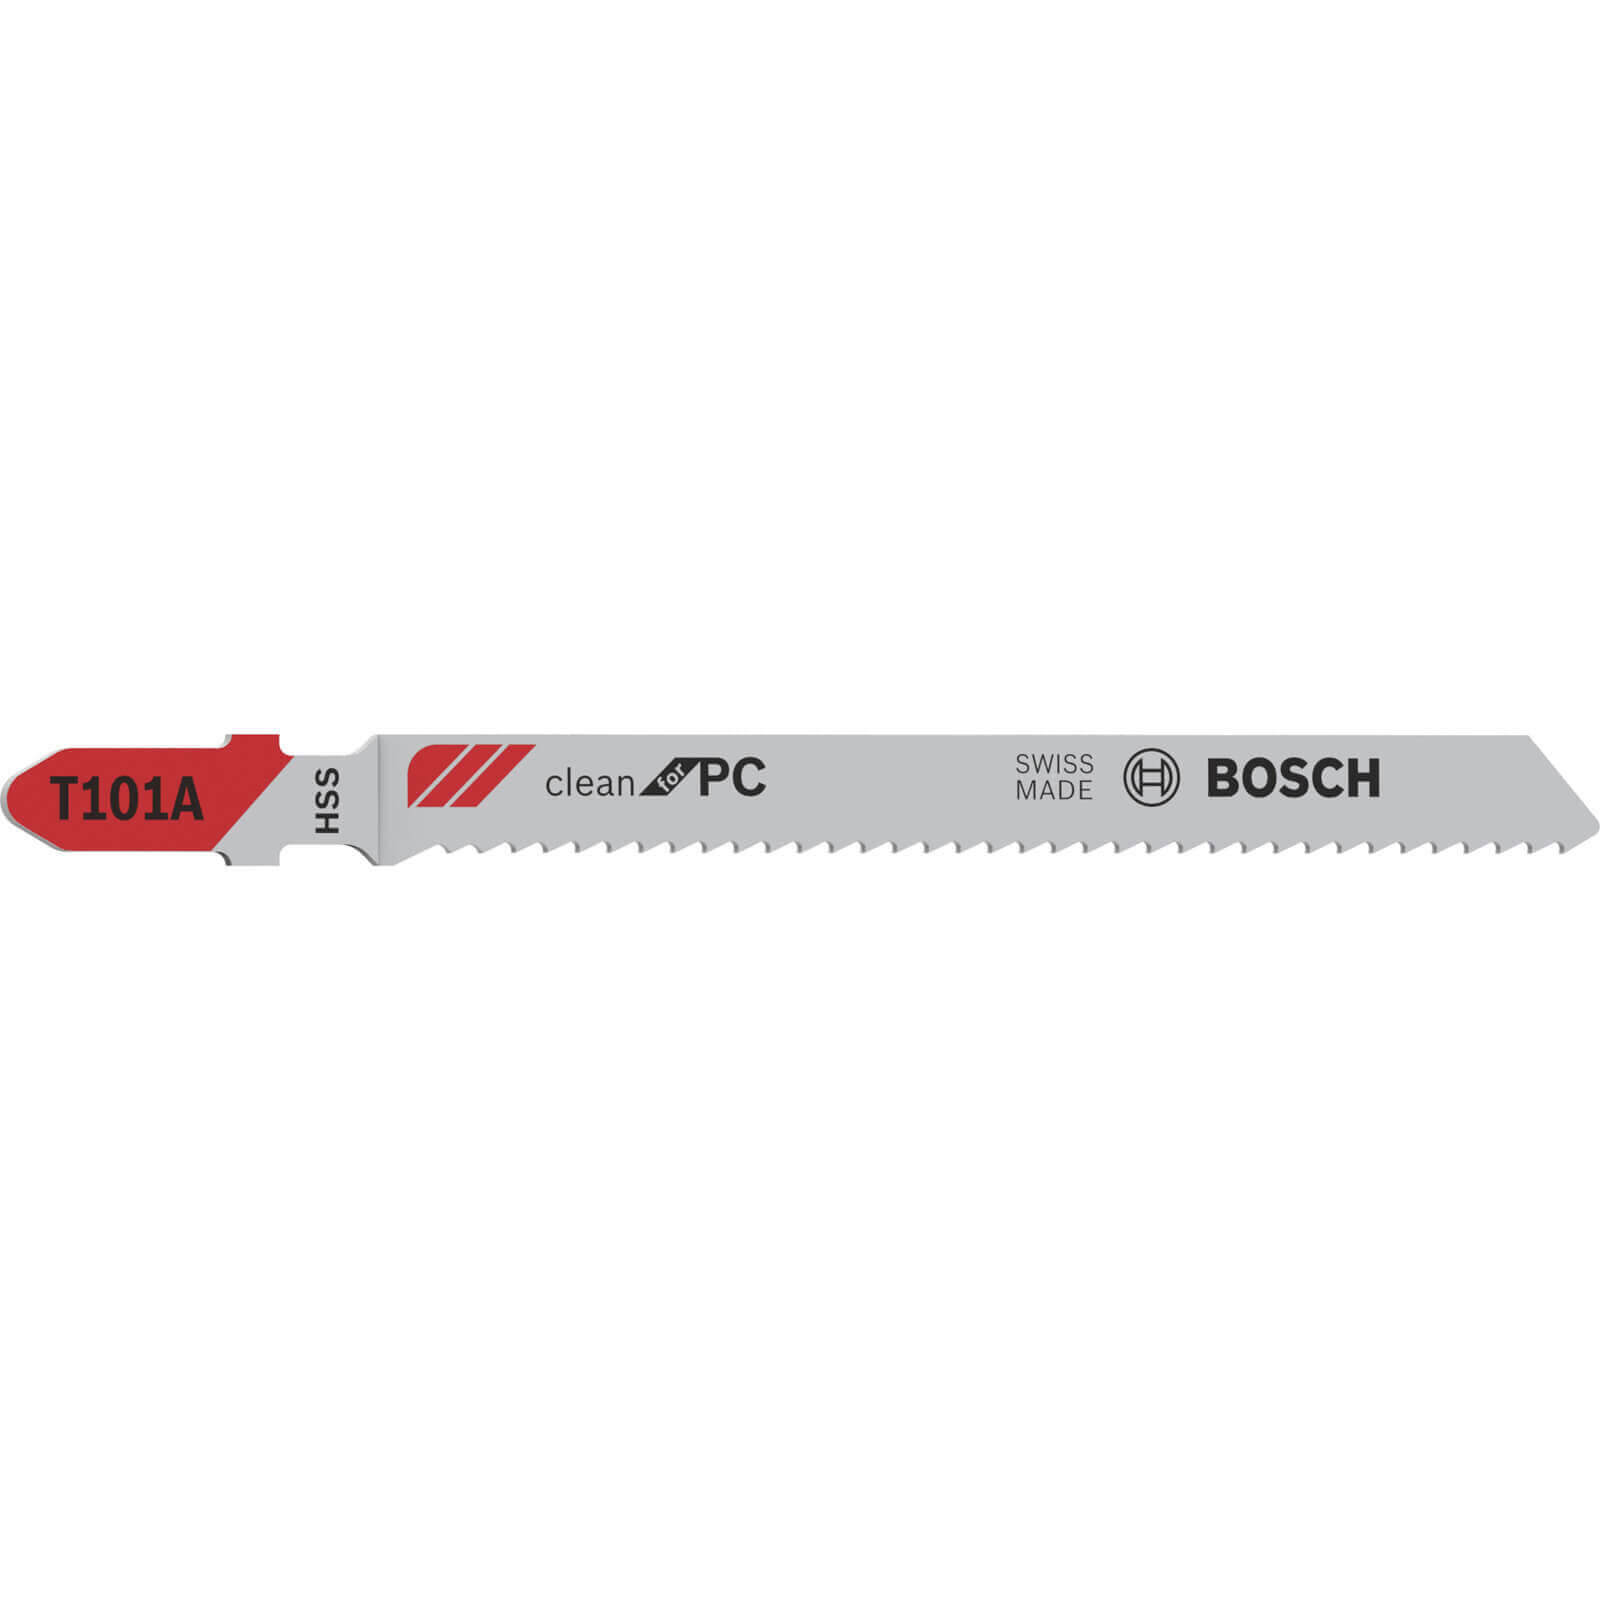 Image of Bosch T 101 A Acrylic and Plastic Cutting Jigsaw Blades Pack of 3